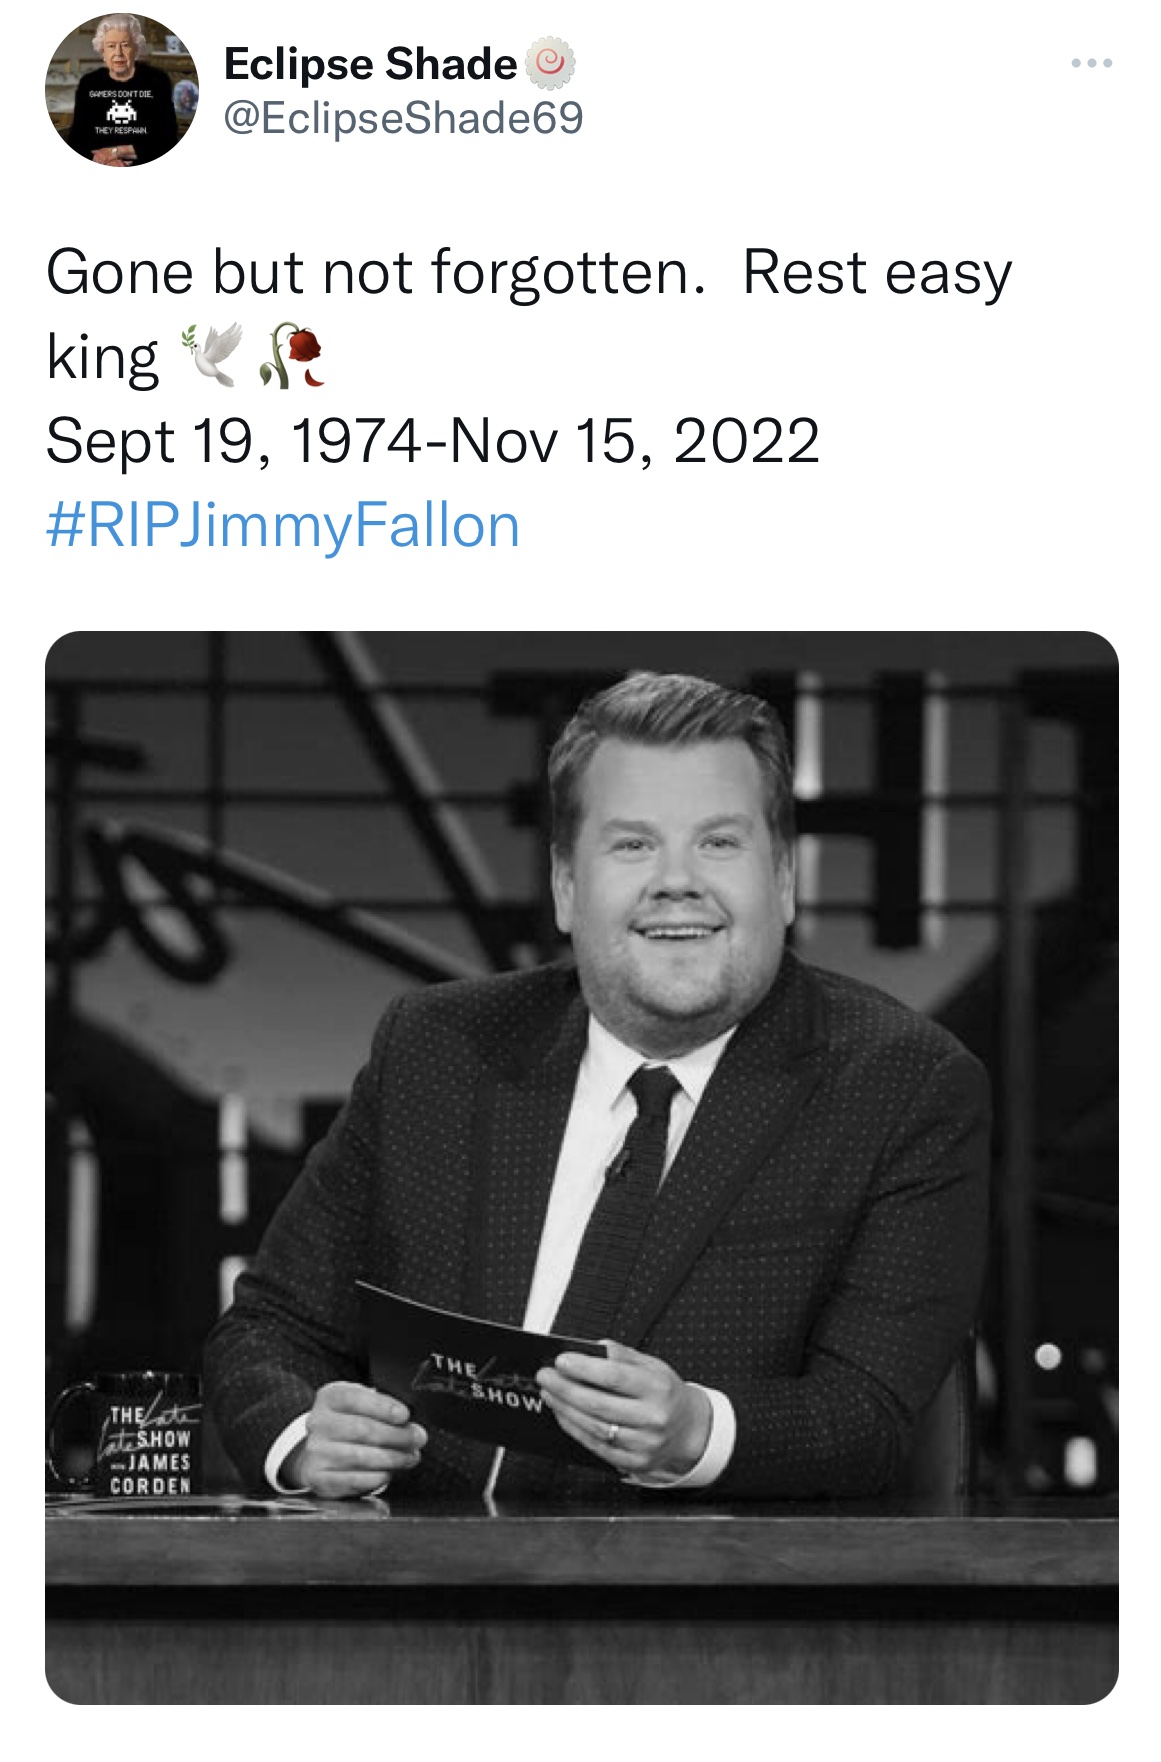 Tweets roasting celebrities - jam3s corden - Gamers Don'T Die They Respawn Eclipse Shade Gone but not forgotten. Rest easy king Sept 19, 1974 Fallon The Show James Corden The Show